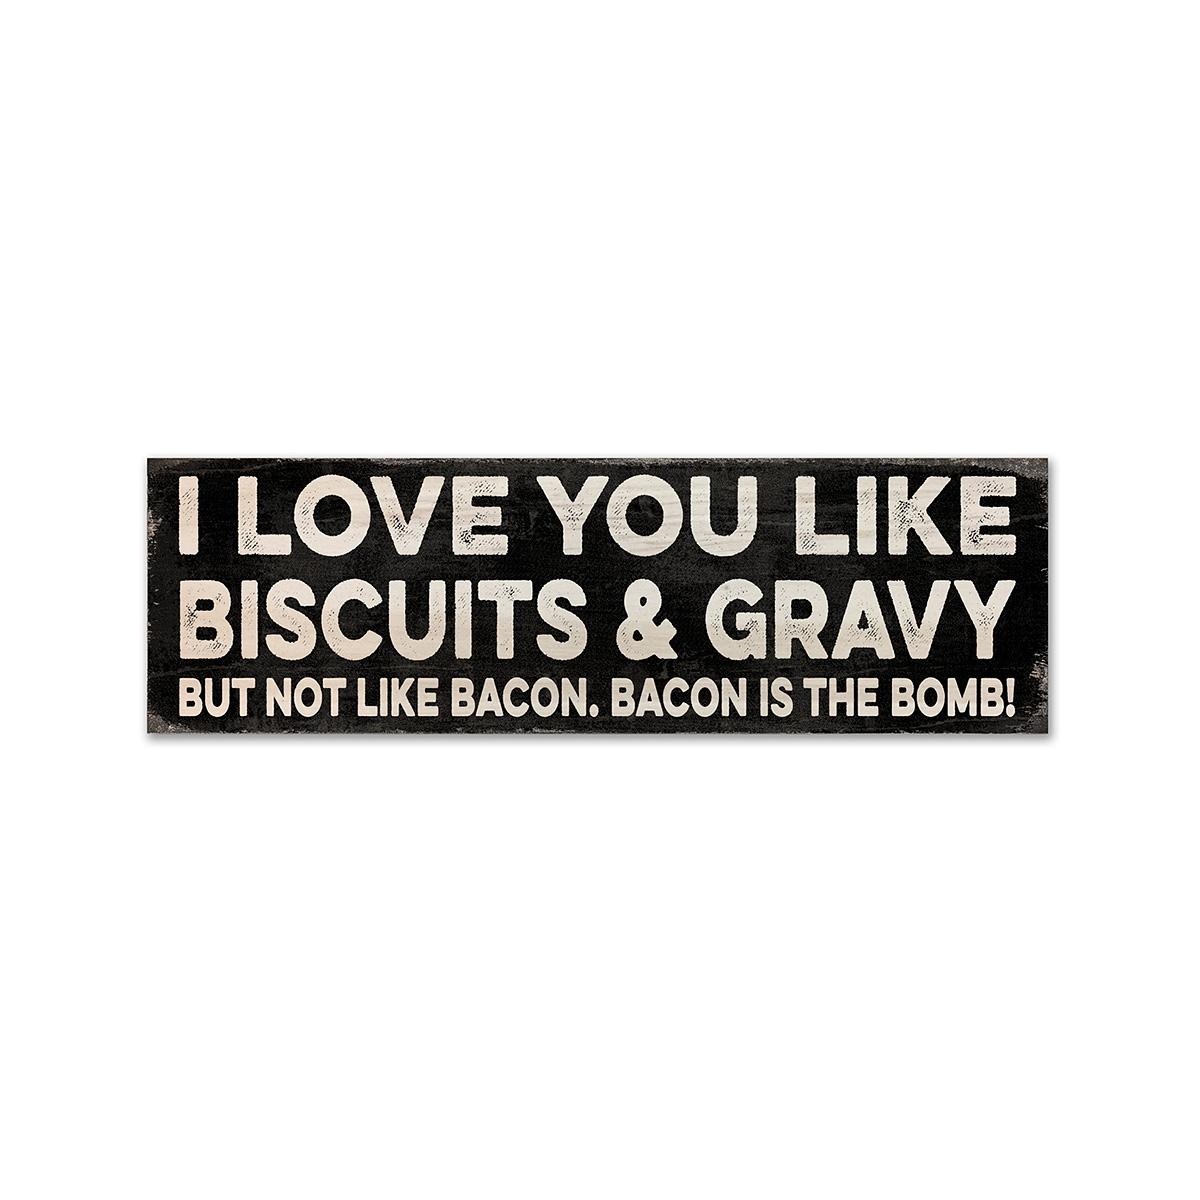  I Love You Like Biscuits & Gravy Sign